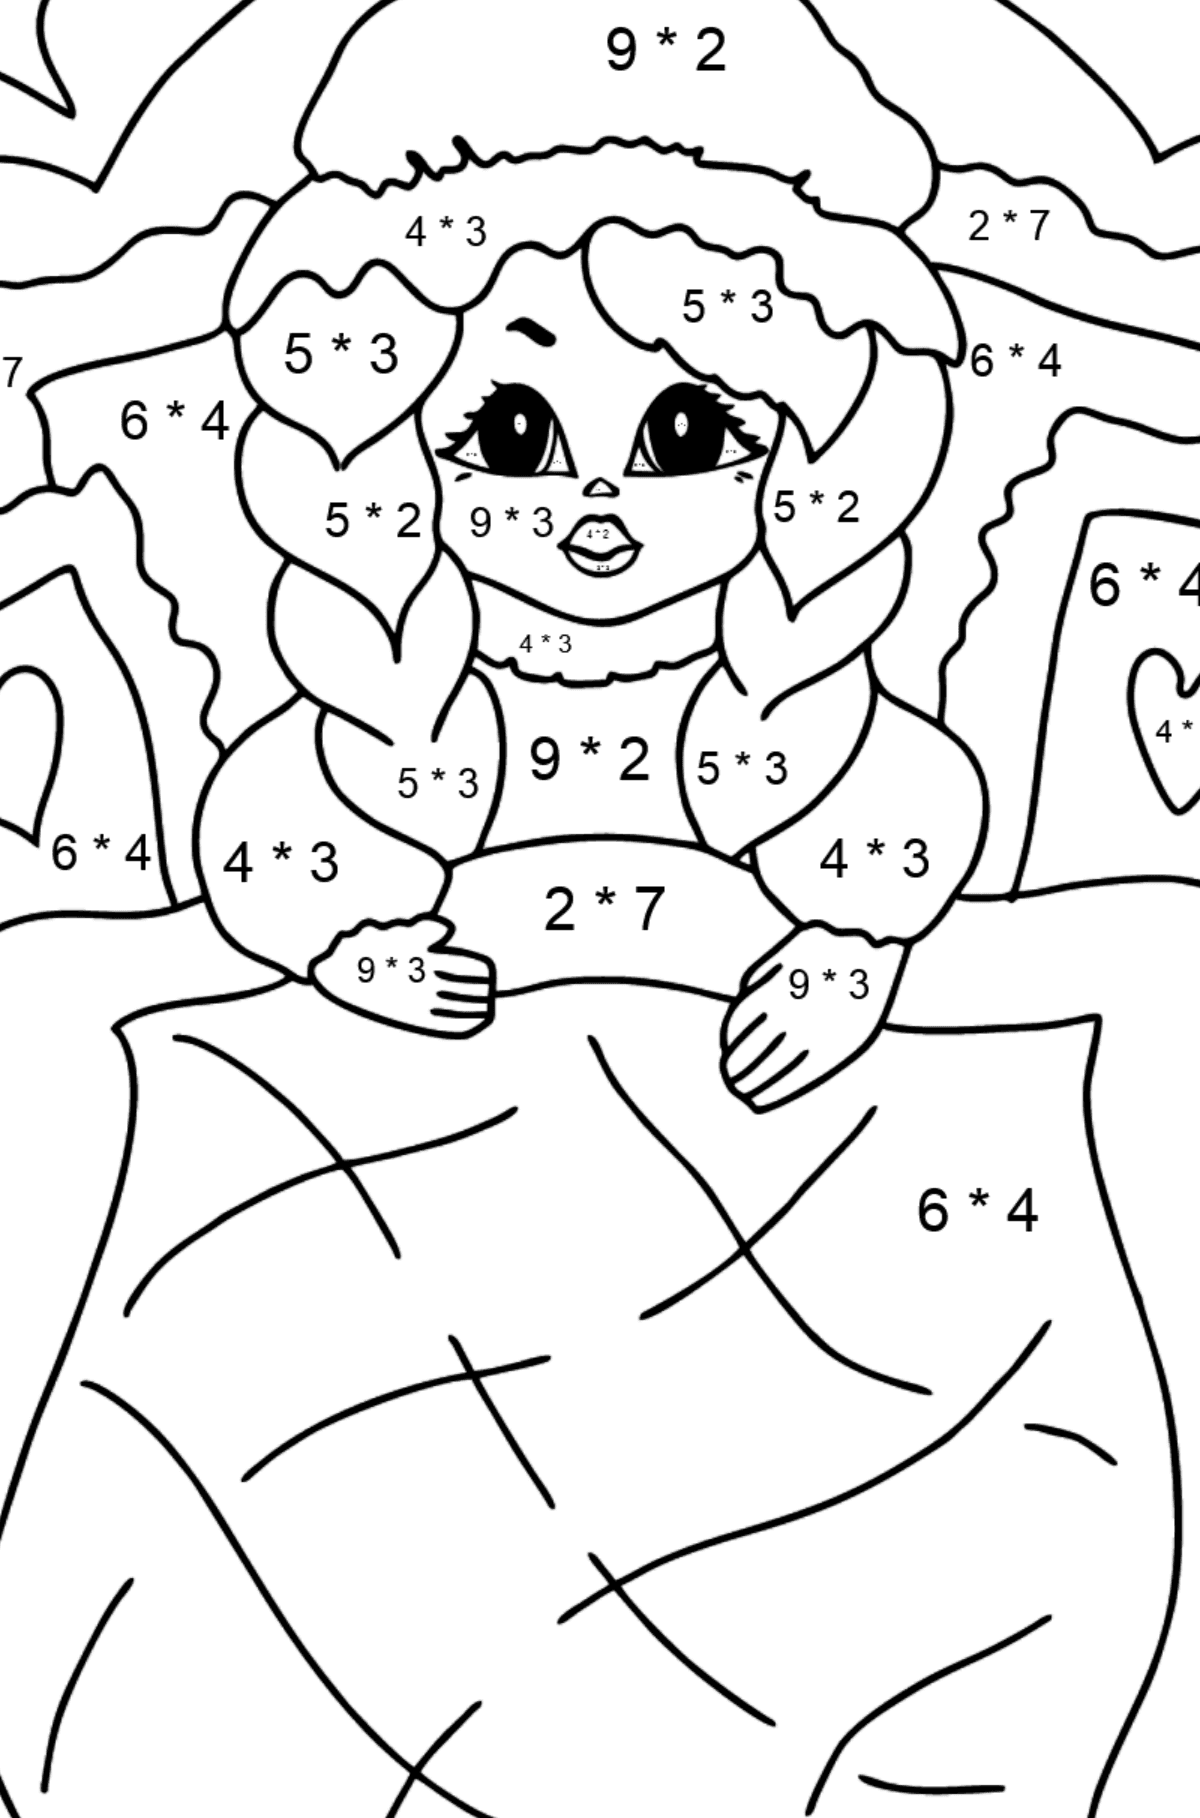 Coloring Page - A Princess in a Bed - for Girls - Math Coloring - Multiplication for Kids